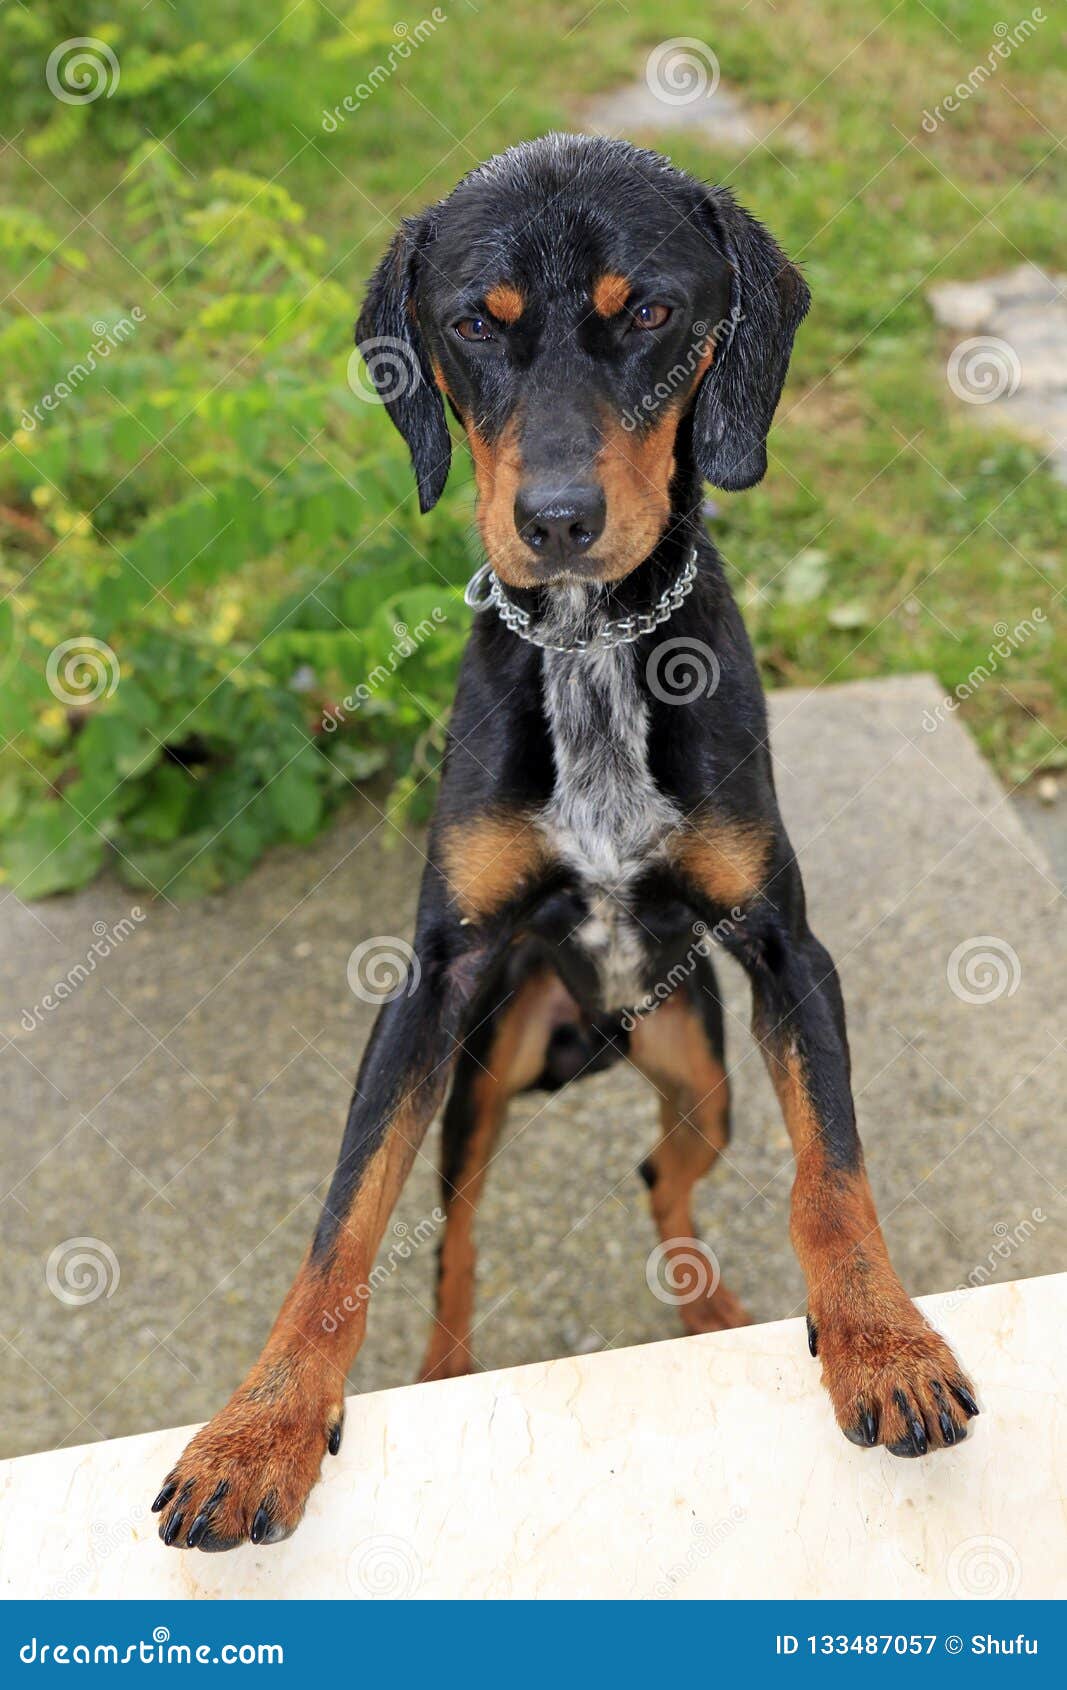 Flap Eared Black And Brown Hound Dog Stock Image Image Of House Black 133487057